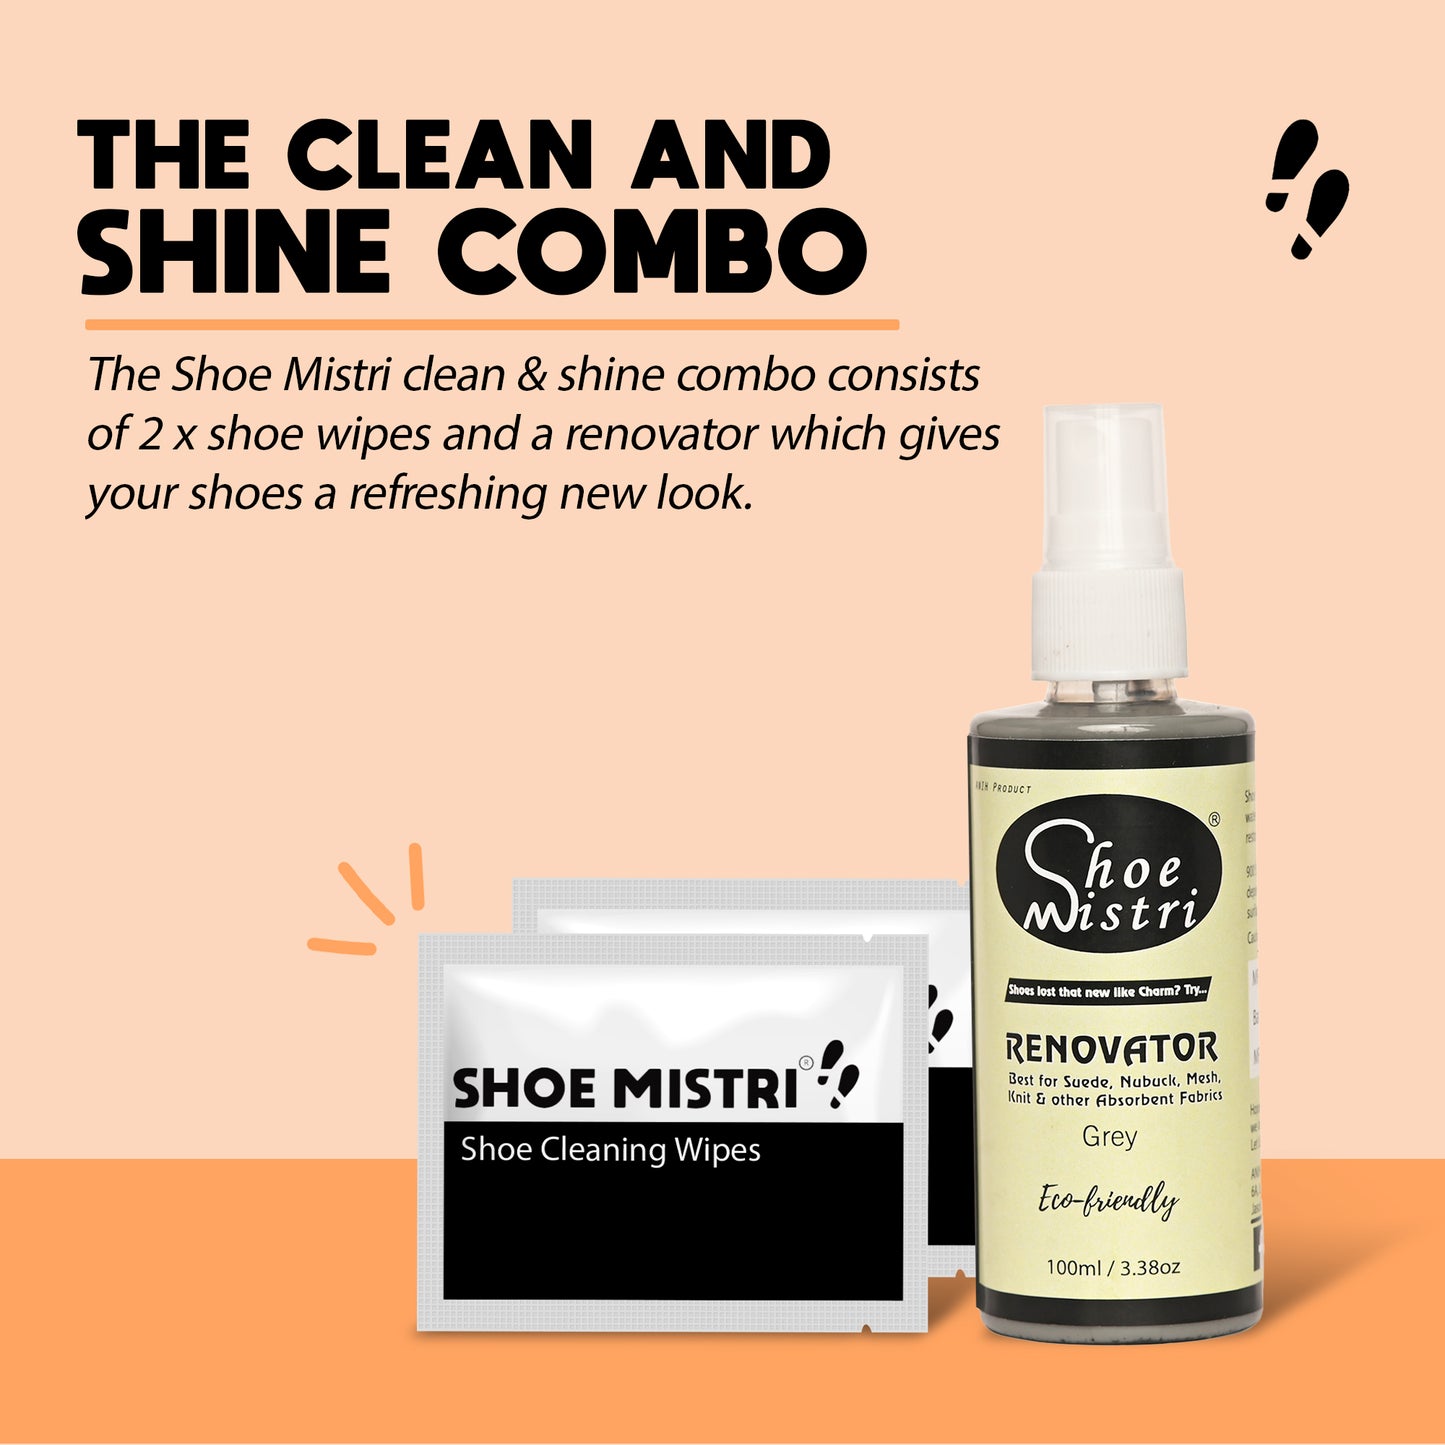 Shoe Mistri Shoe Cleaner (2 Wipes) and Grey Renovator